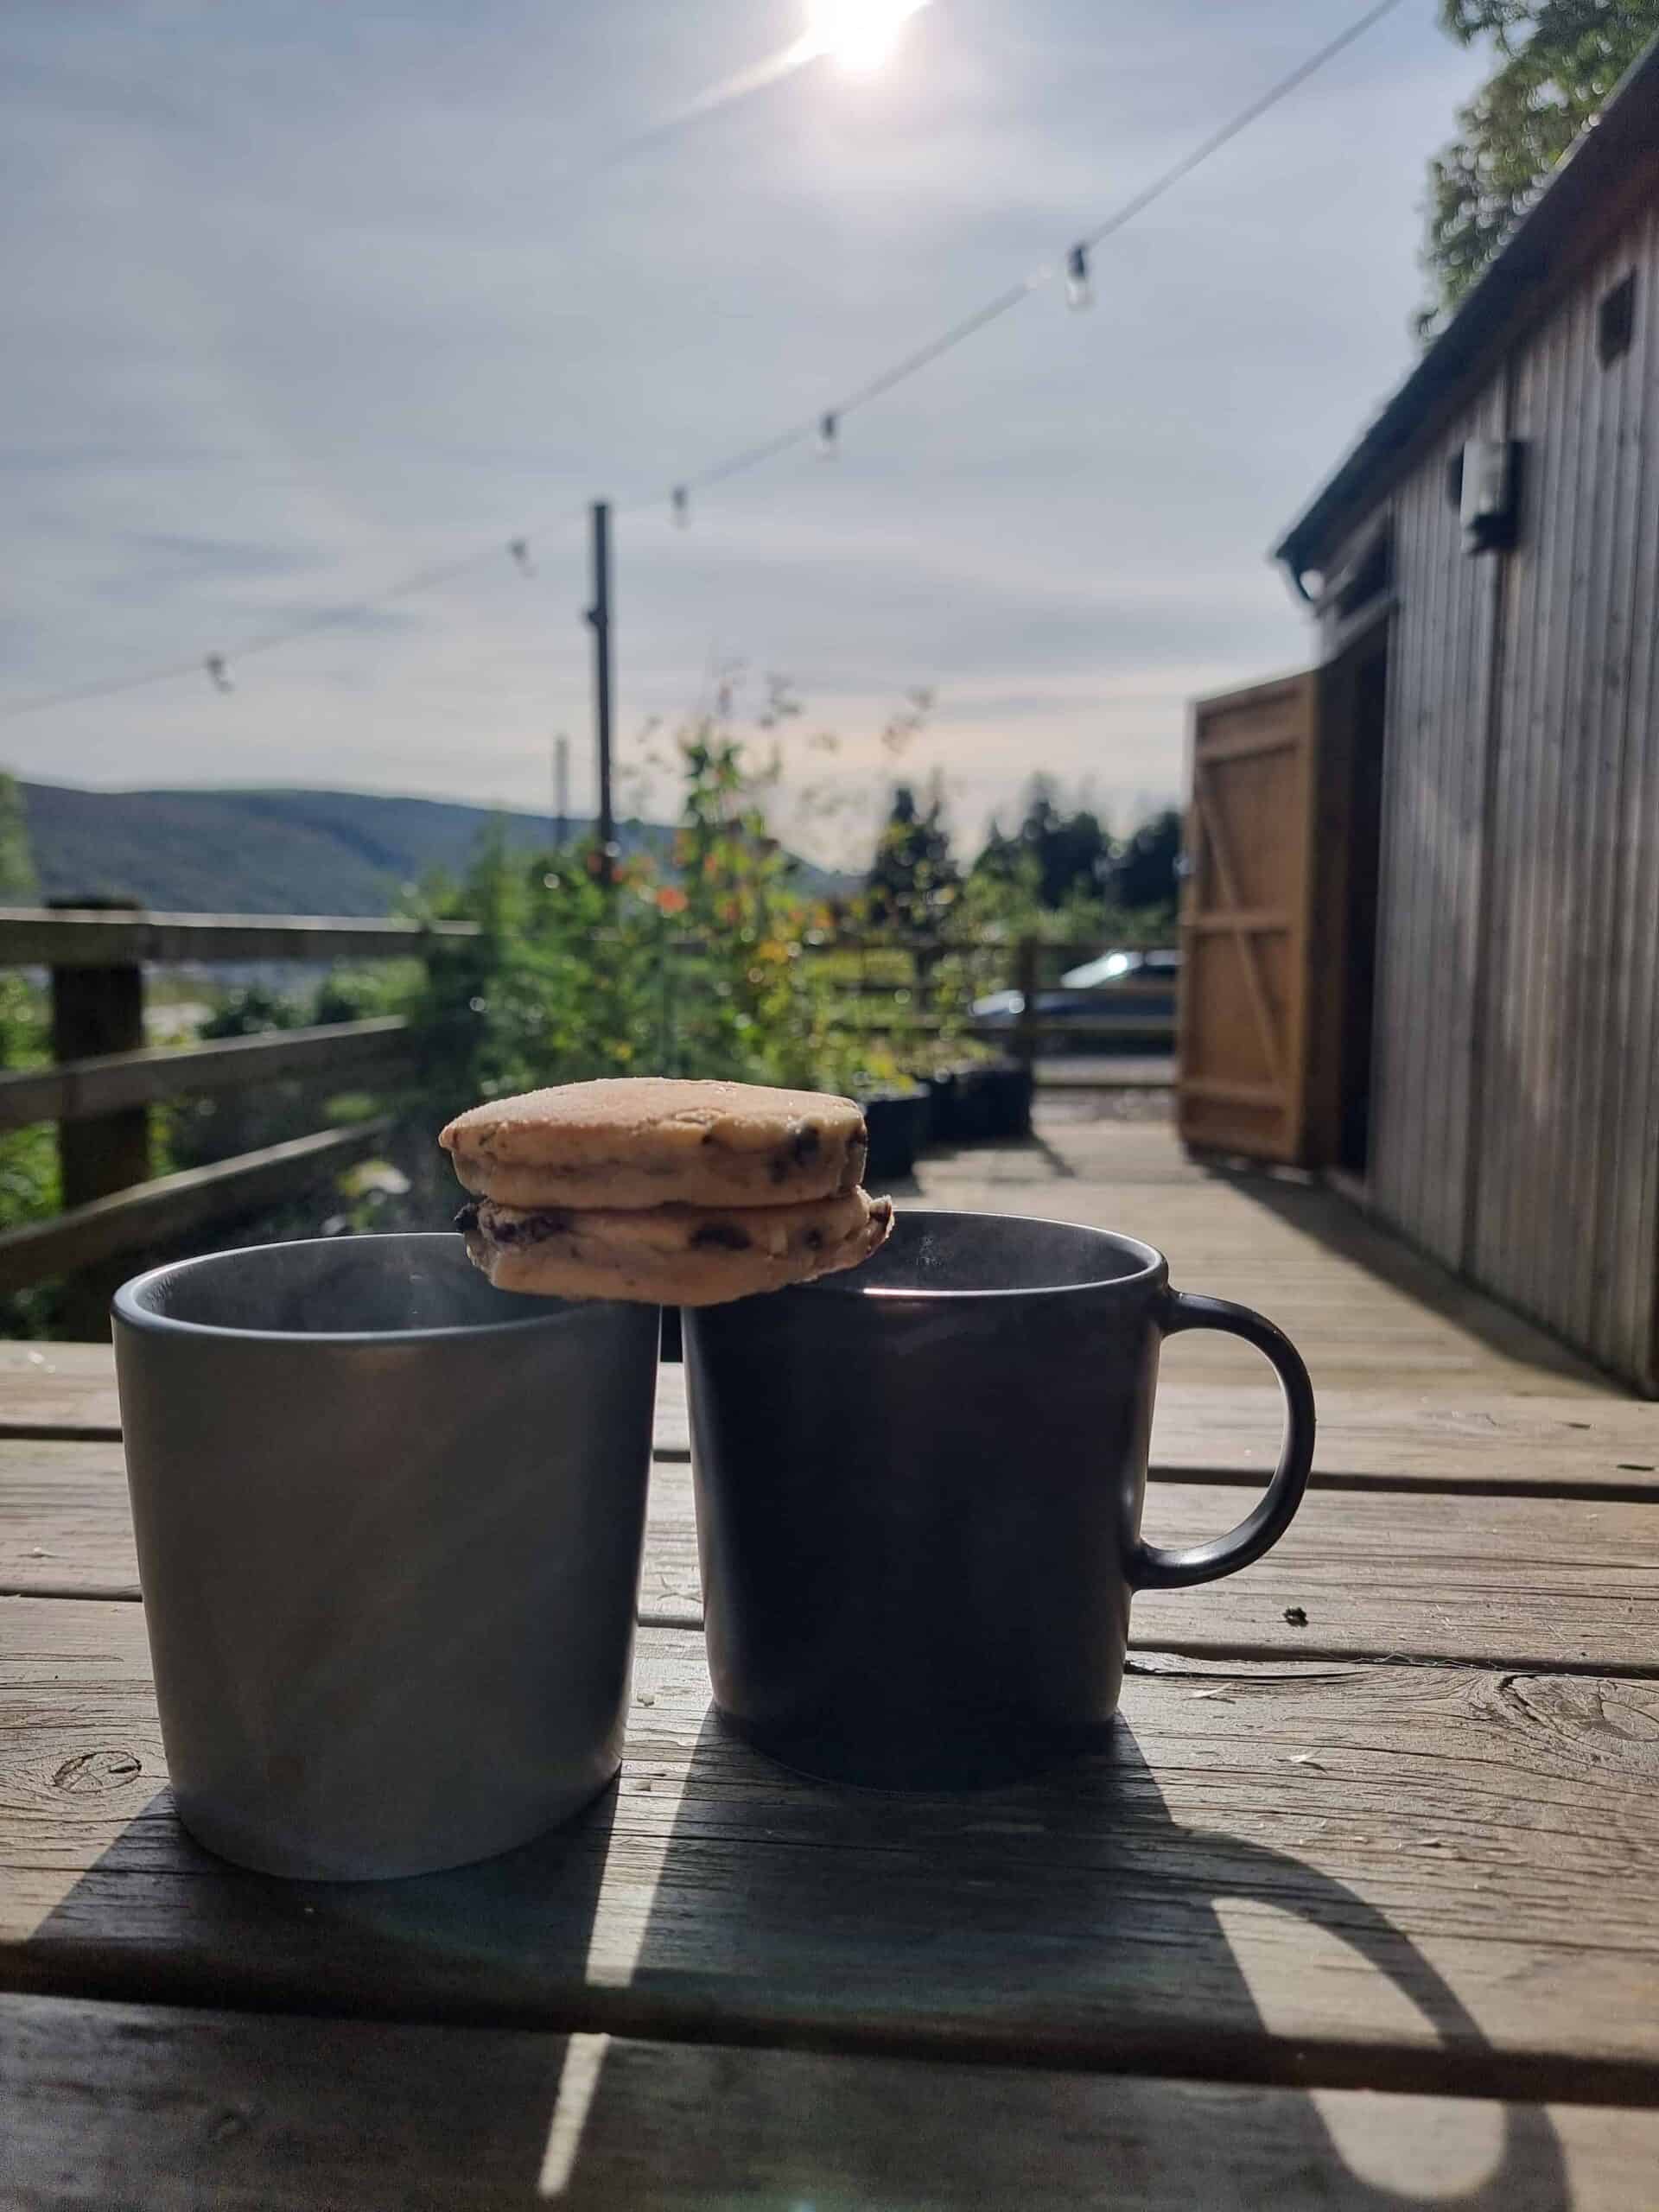 Mugs of hot drinks with welsh cakes sat on a table against a back drop of a clear sky and hills